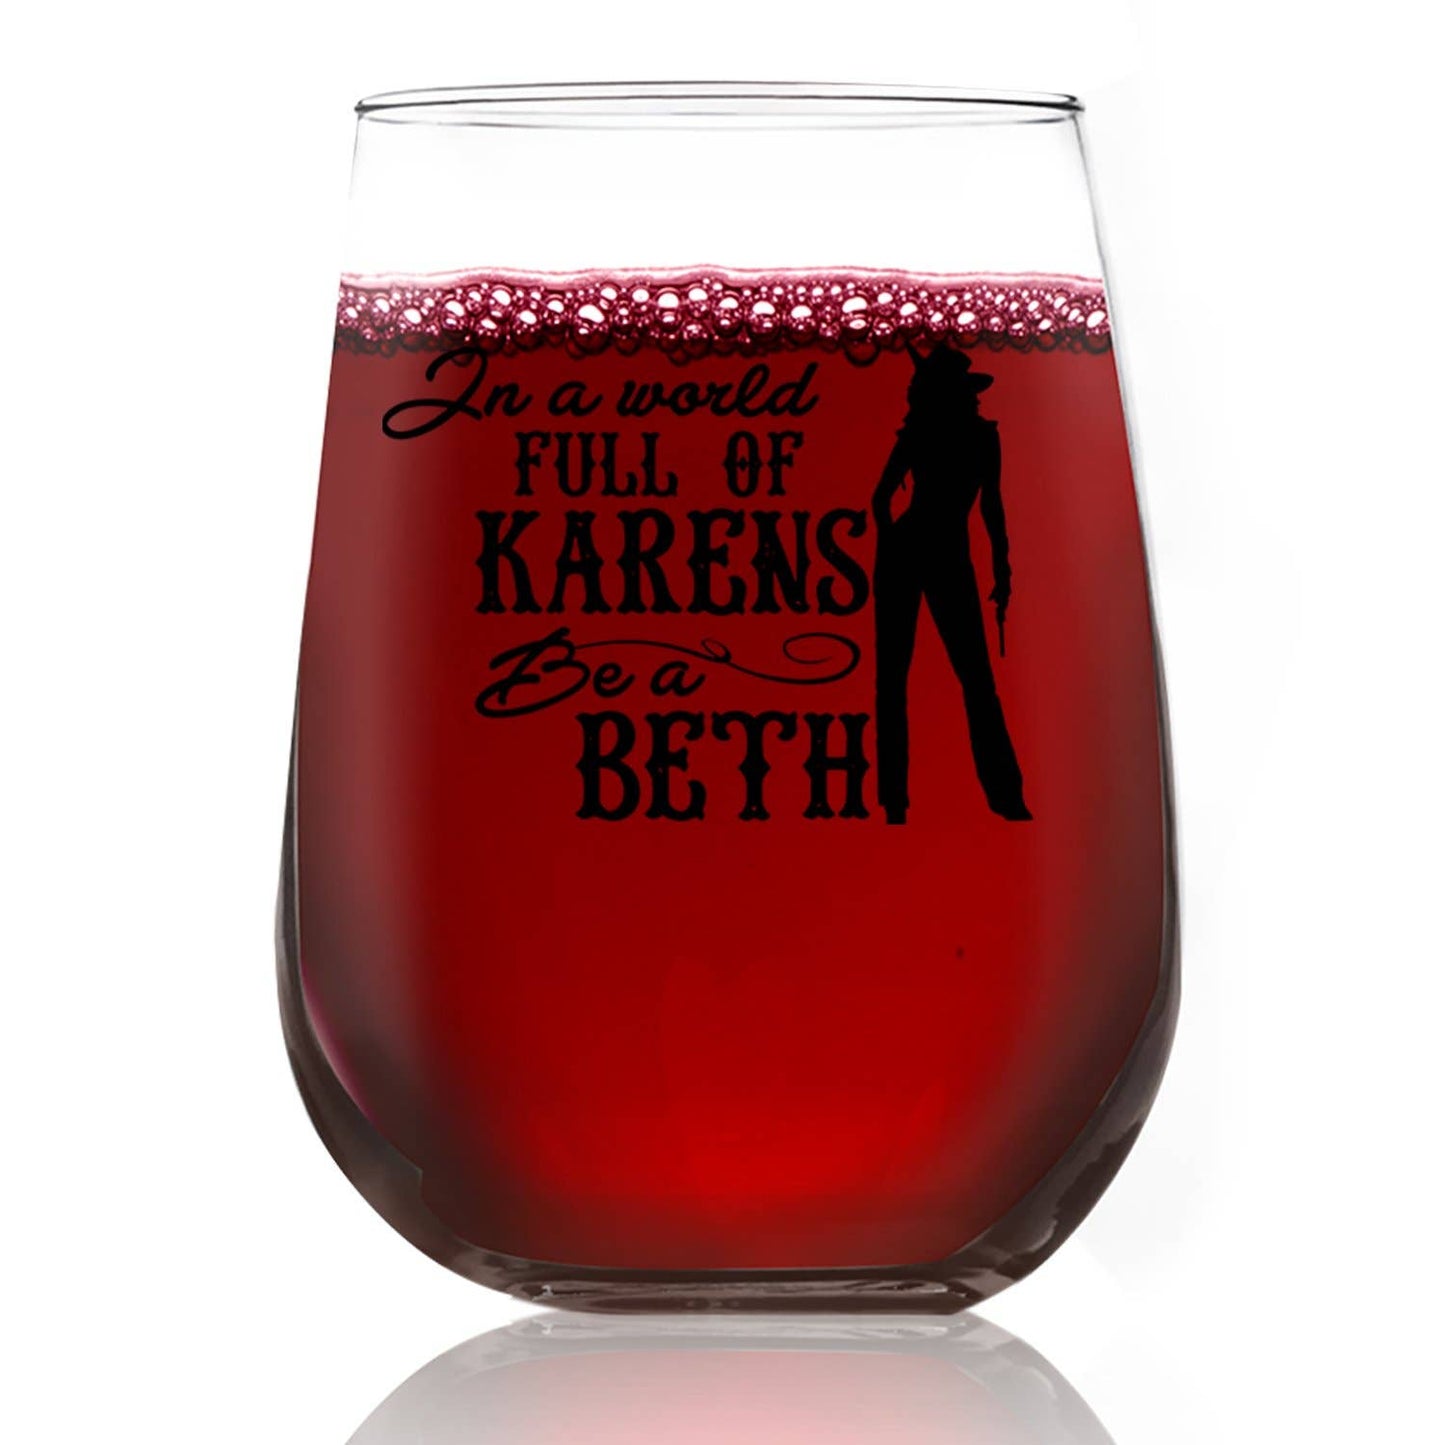 Wine Glass "In A World Full Of Karens Be A Beth"